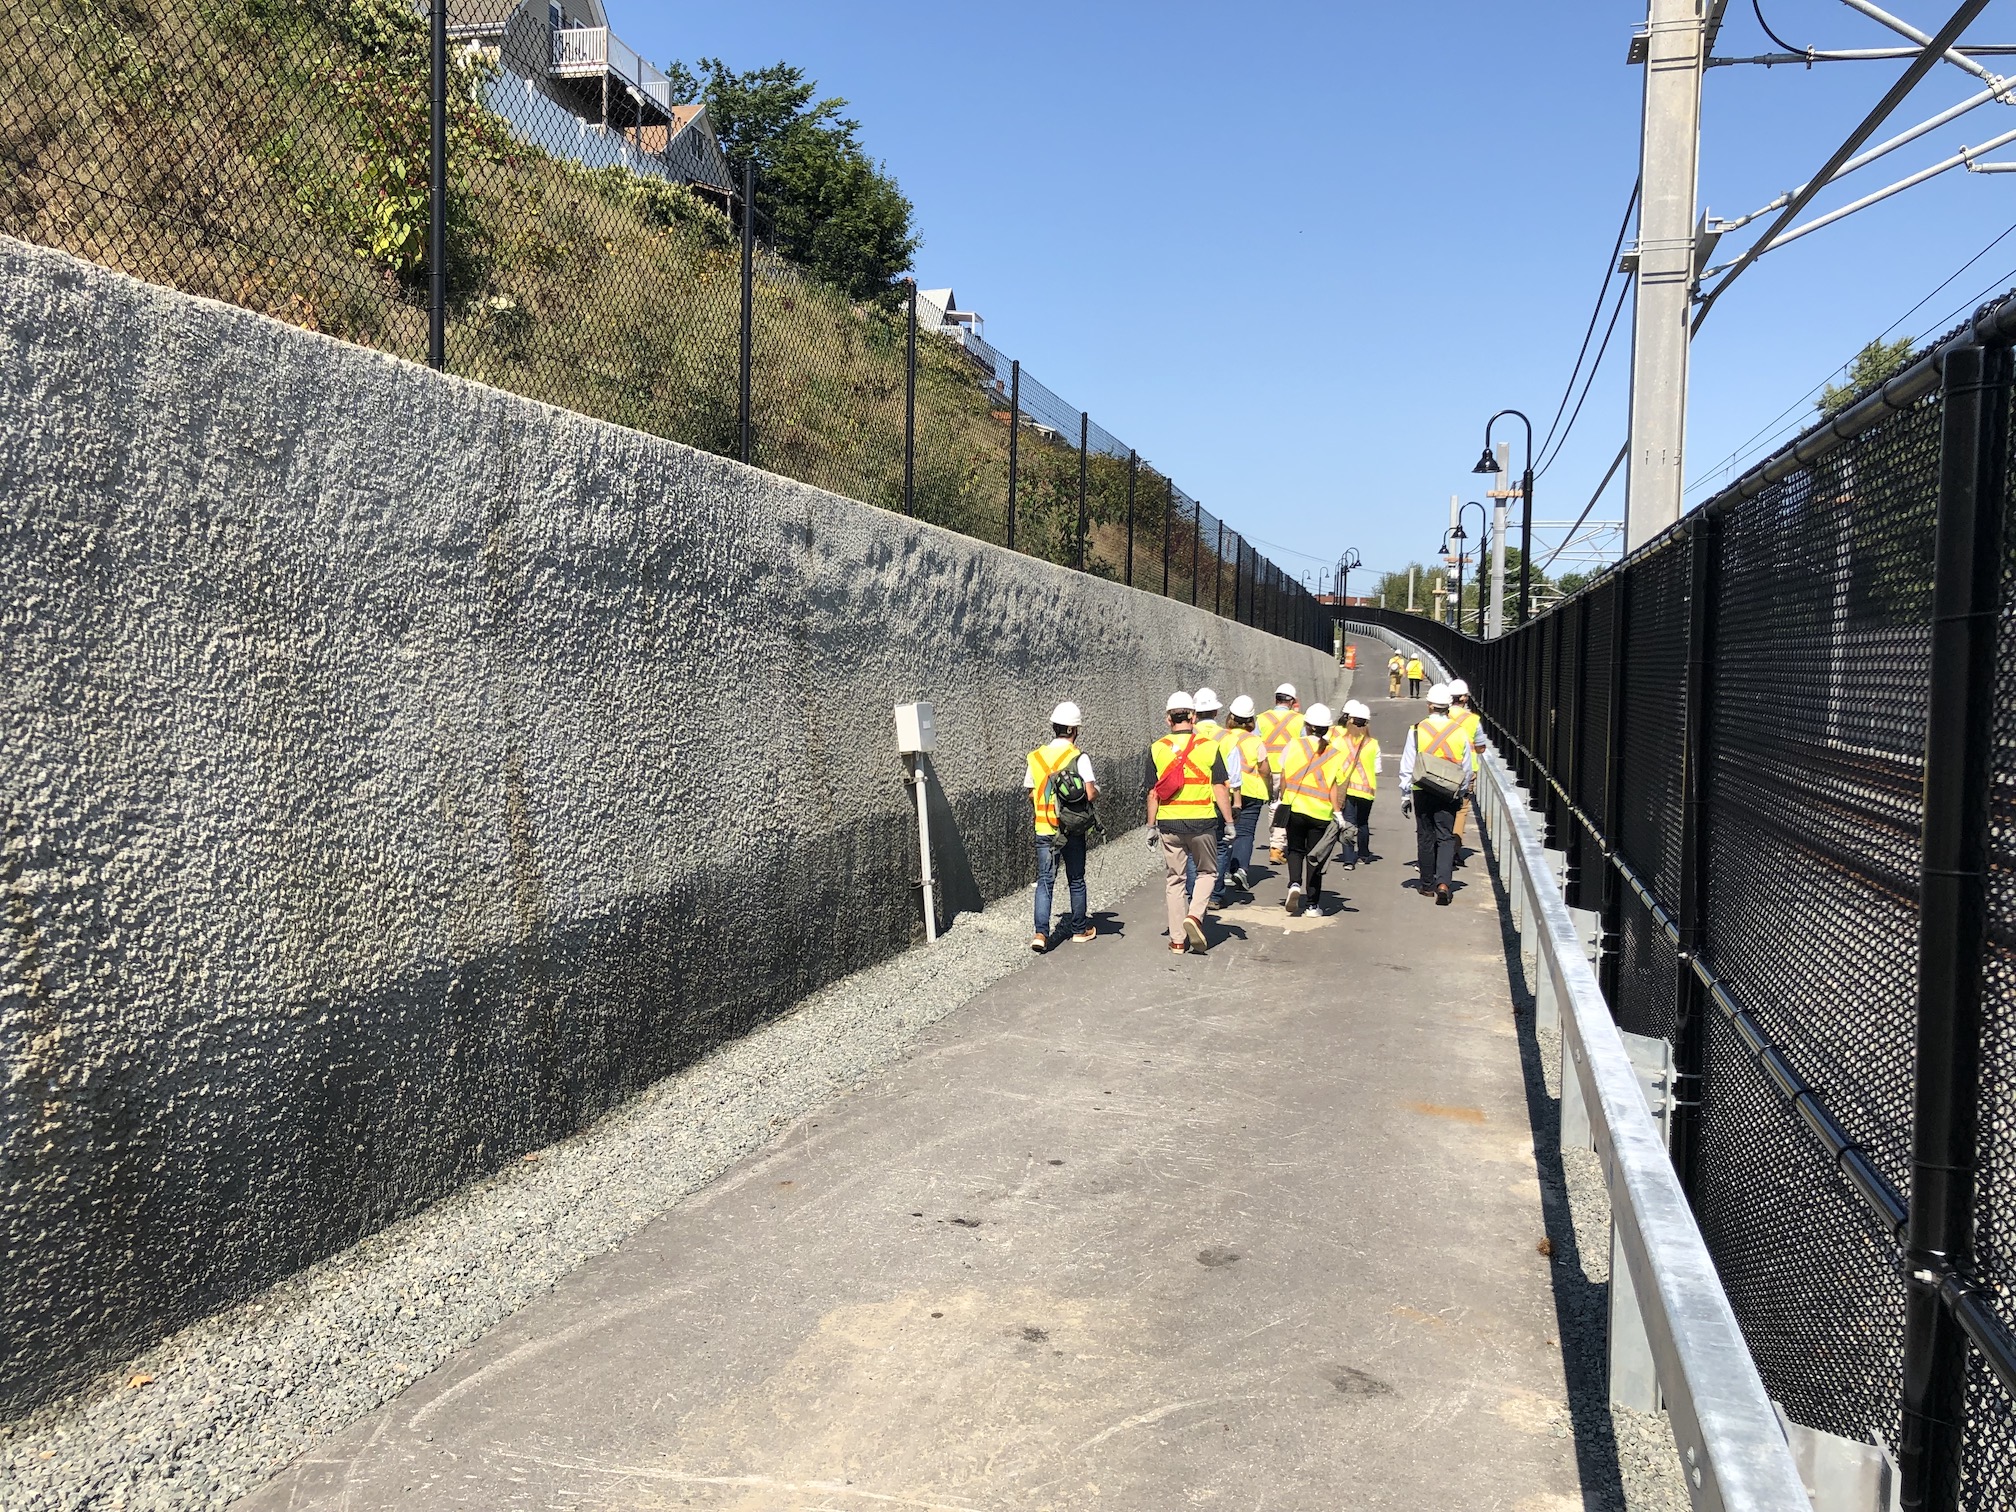 A crowd of people in construction vests climbs a paved path as it gently climbs uphill next to a retaining wall (left) and a fence that separates the trail from the Green Line tracks (right)